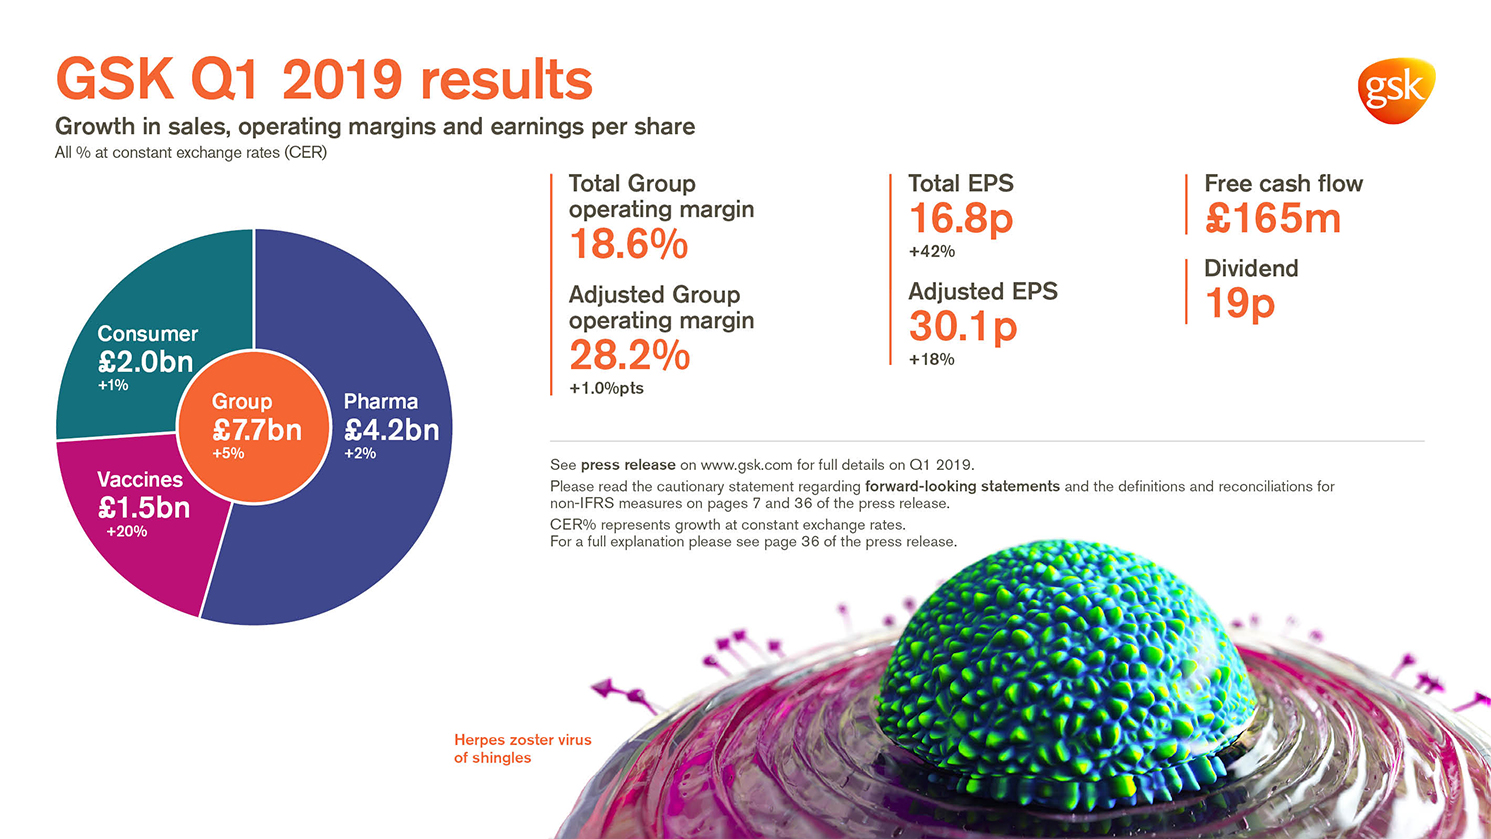 Q1 2019 results infographic